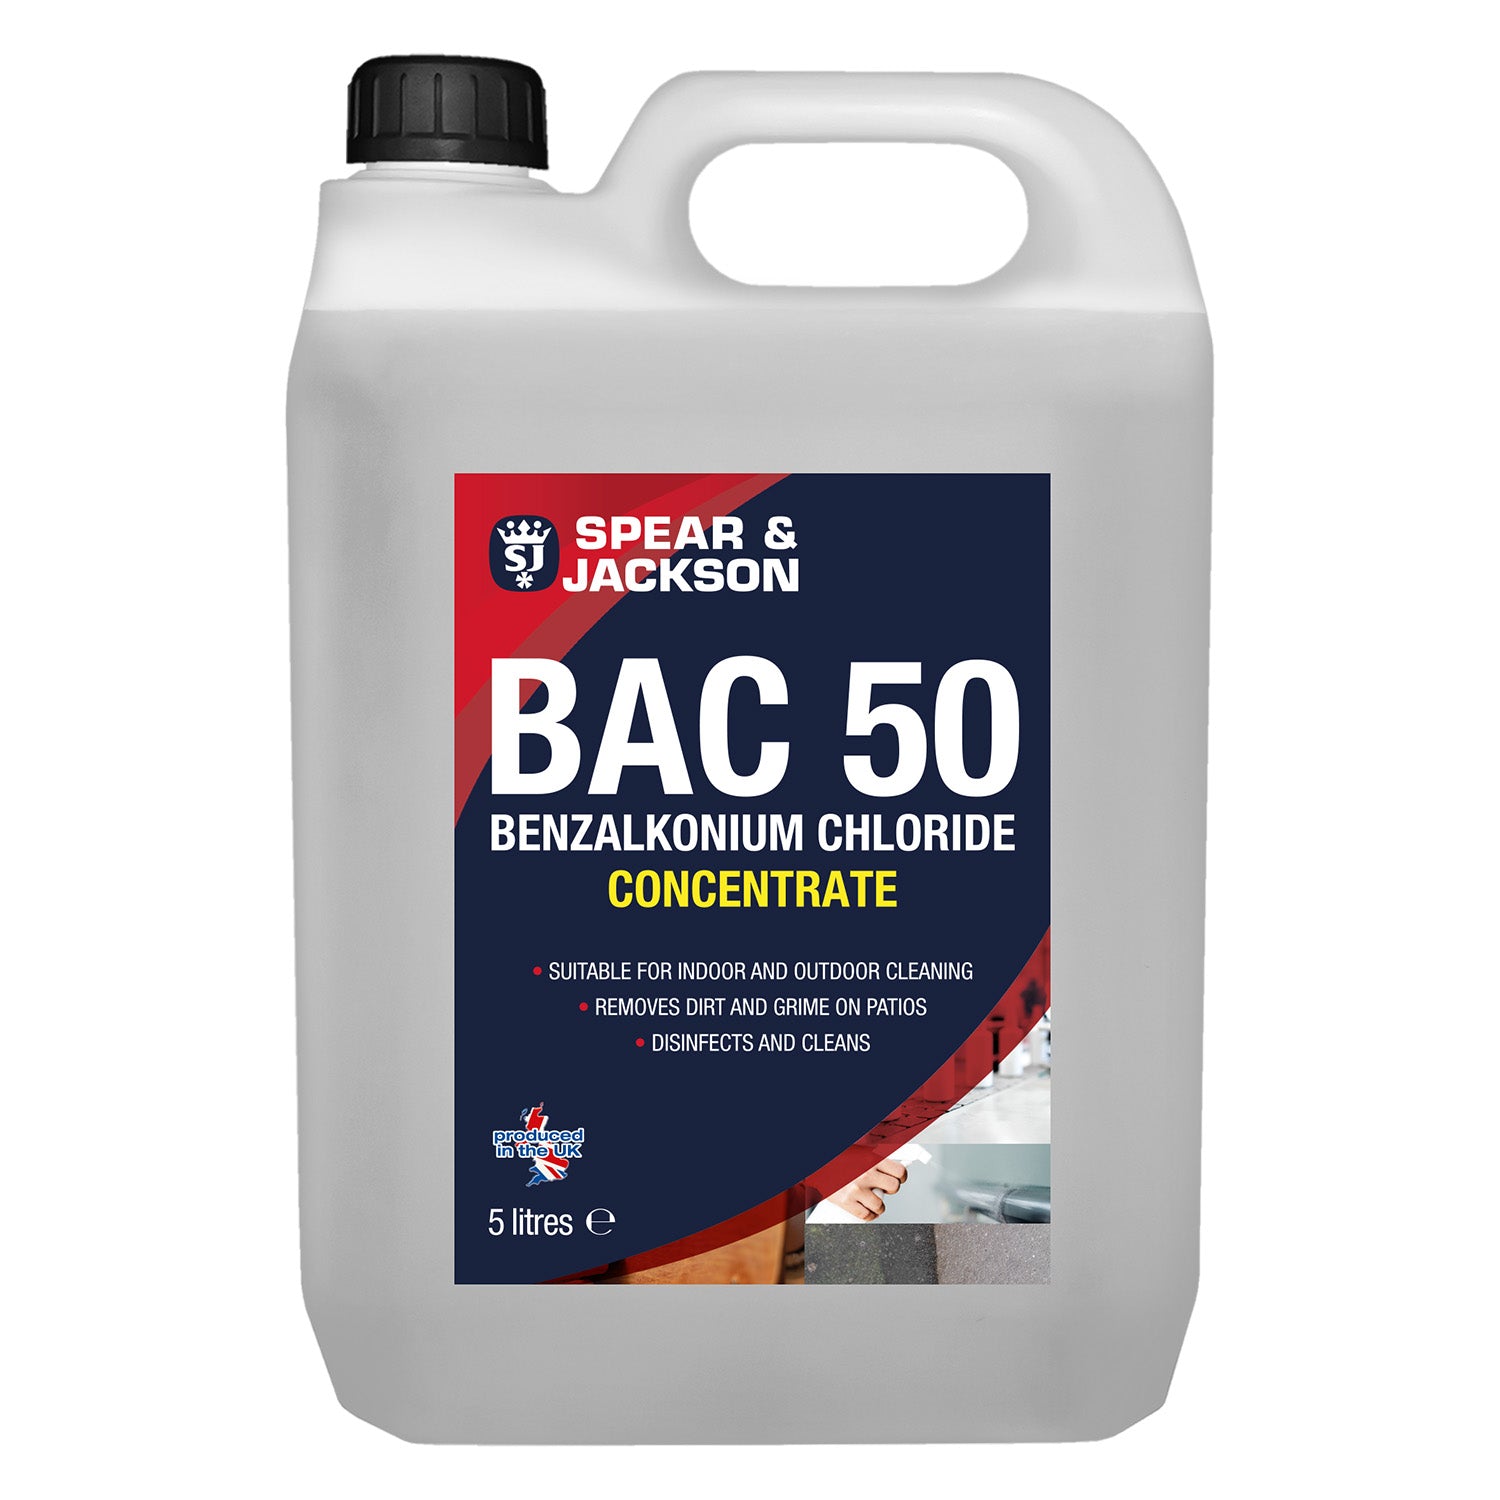 BAC 50 Benzalkonium Chloride Concentrated 2 x 5L Spear & Jackson